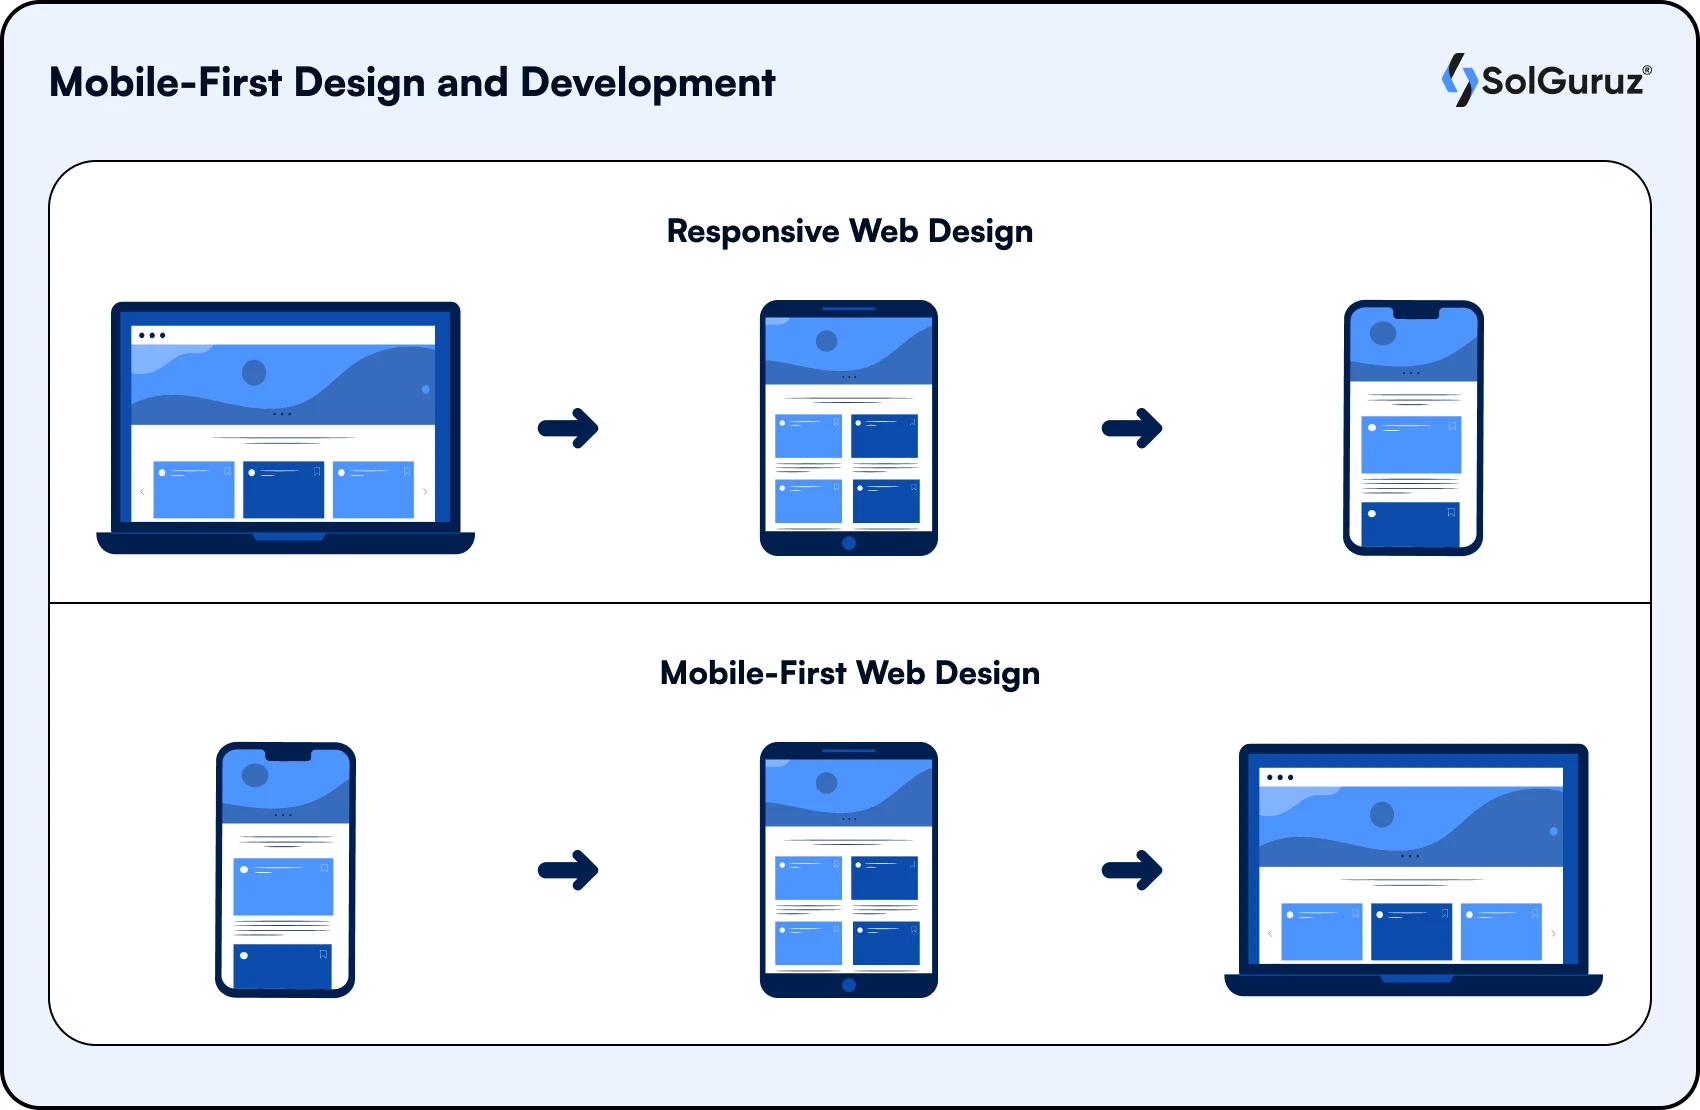 Mobile-First Design and Development